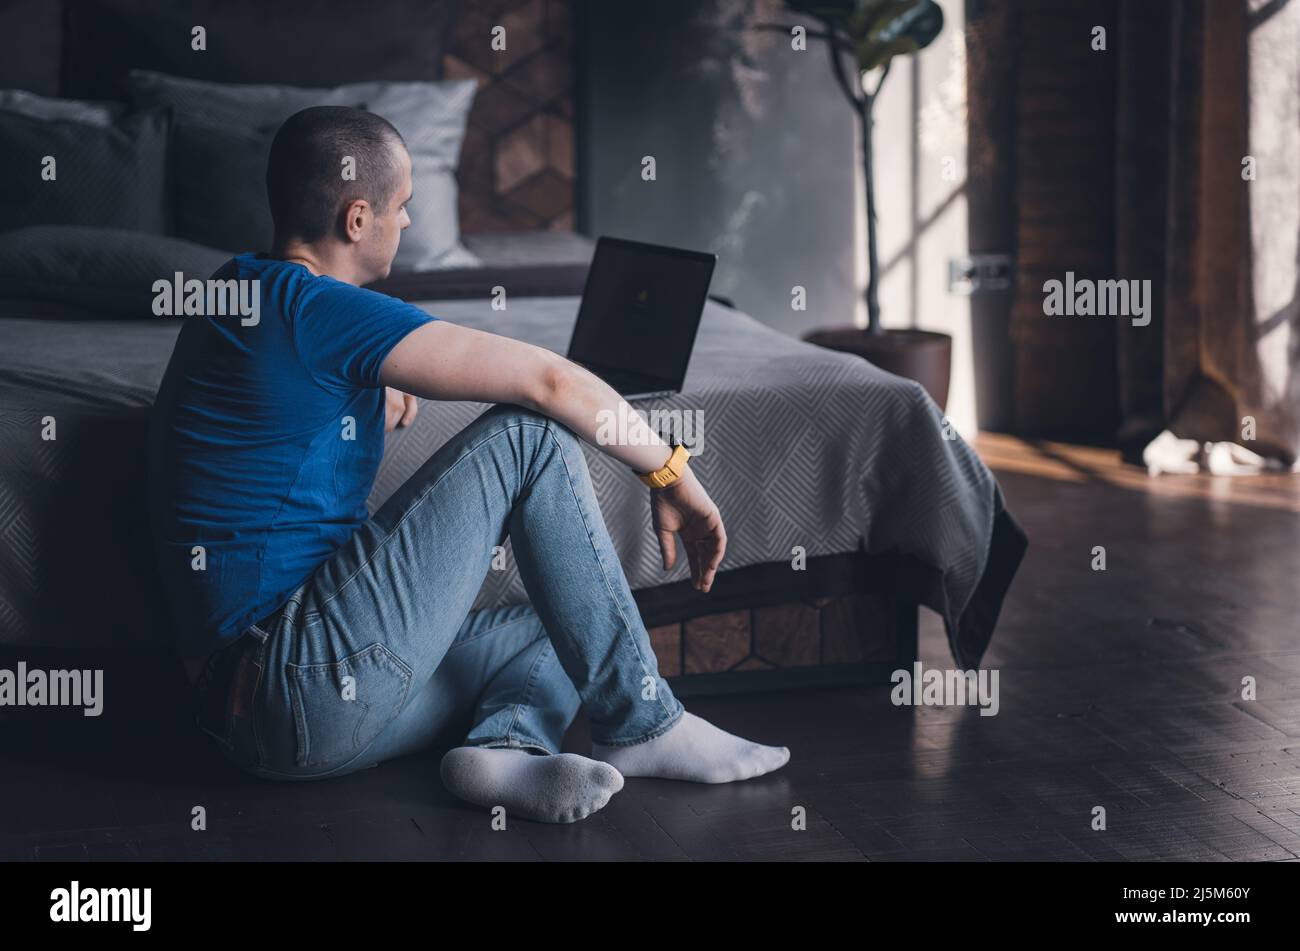 Adult man in blue t-shirt working on laptop Stock Photo